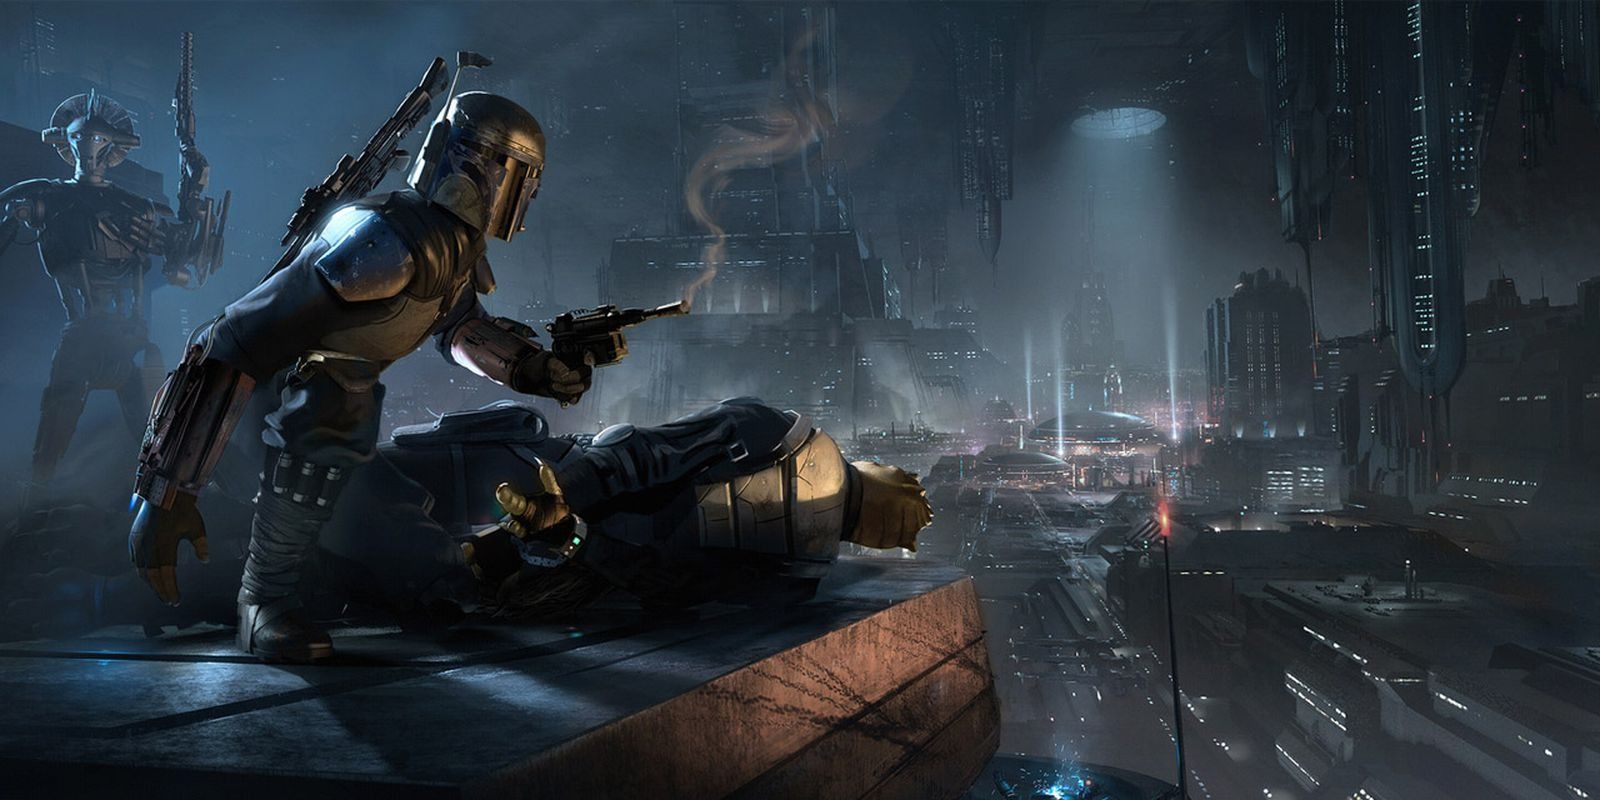 Still of Boba Fett from the cancelled game Star Wars 1313